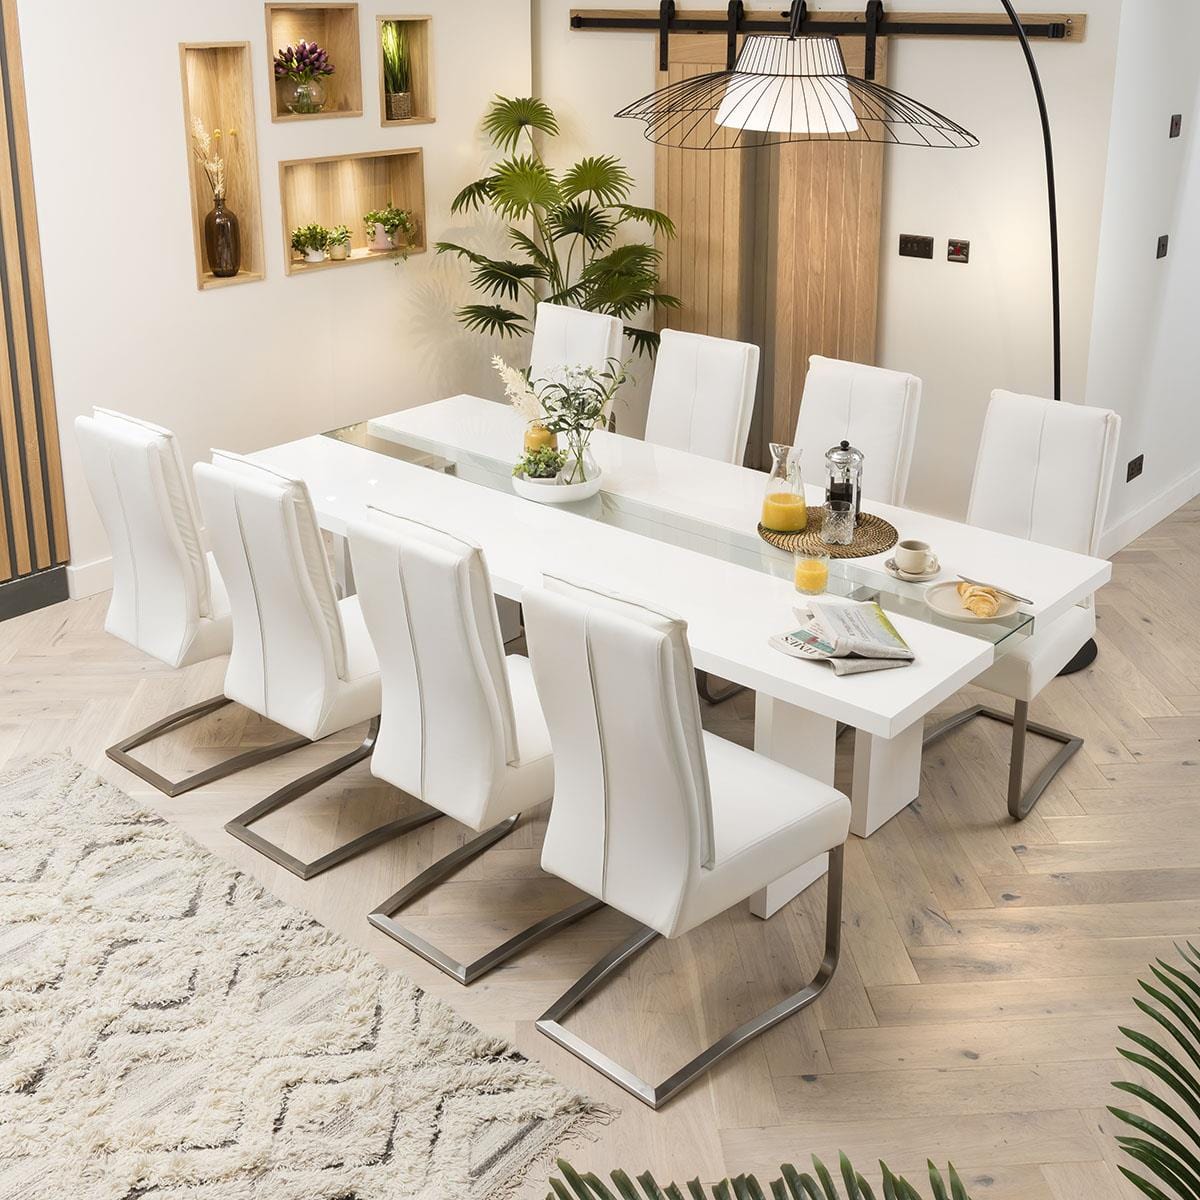 Quatropi 8 Seater Table & Leather Chairs Dining Set White